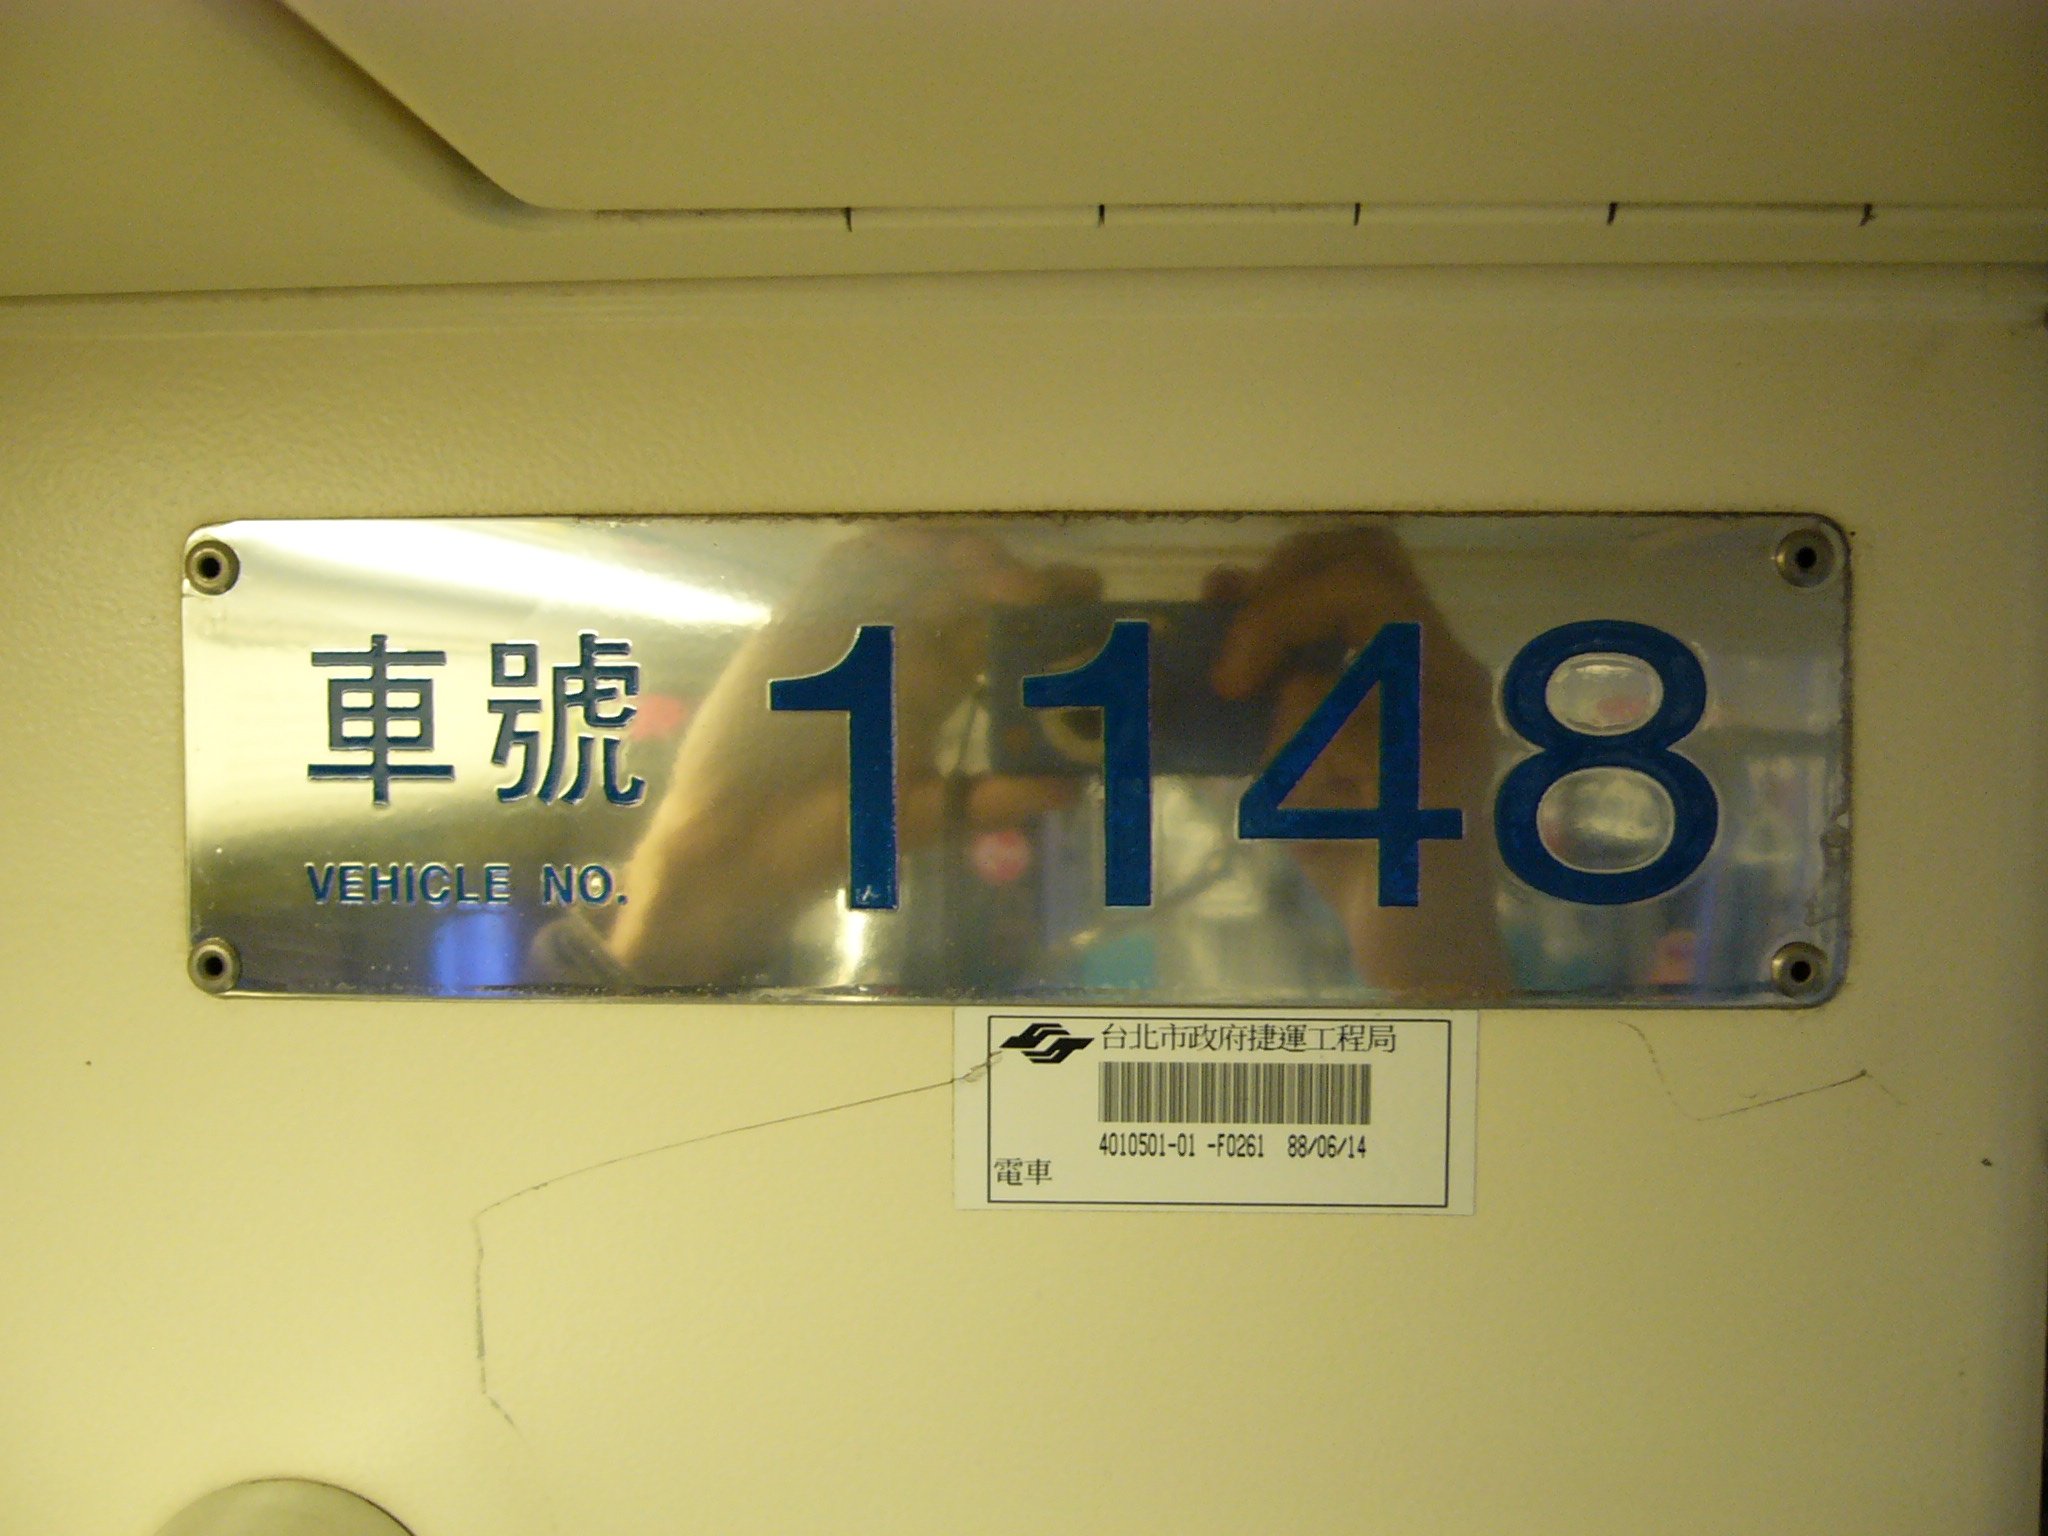 Taipei_MRT_1148_interior_vehicle_number_plate_and_TPE_DORTS_barcode_tag.jpg